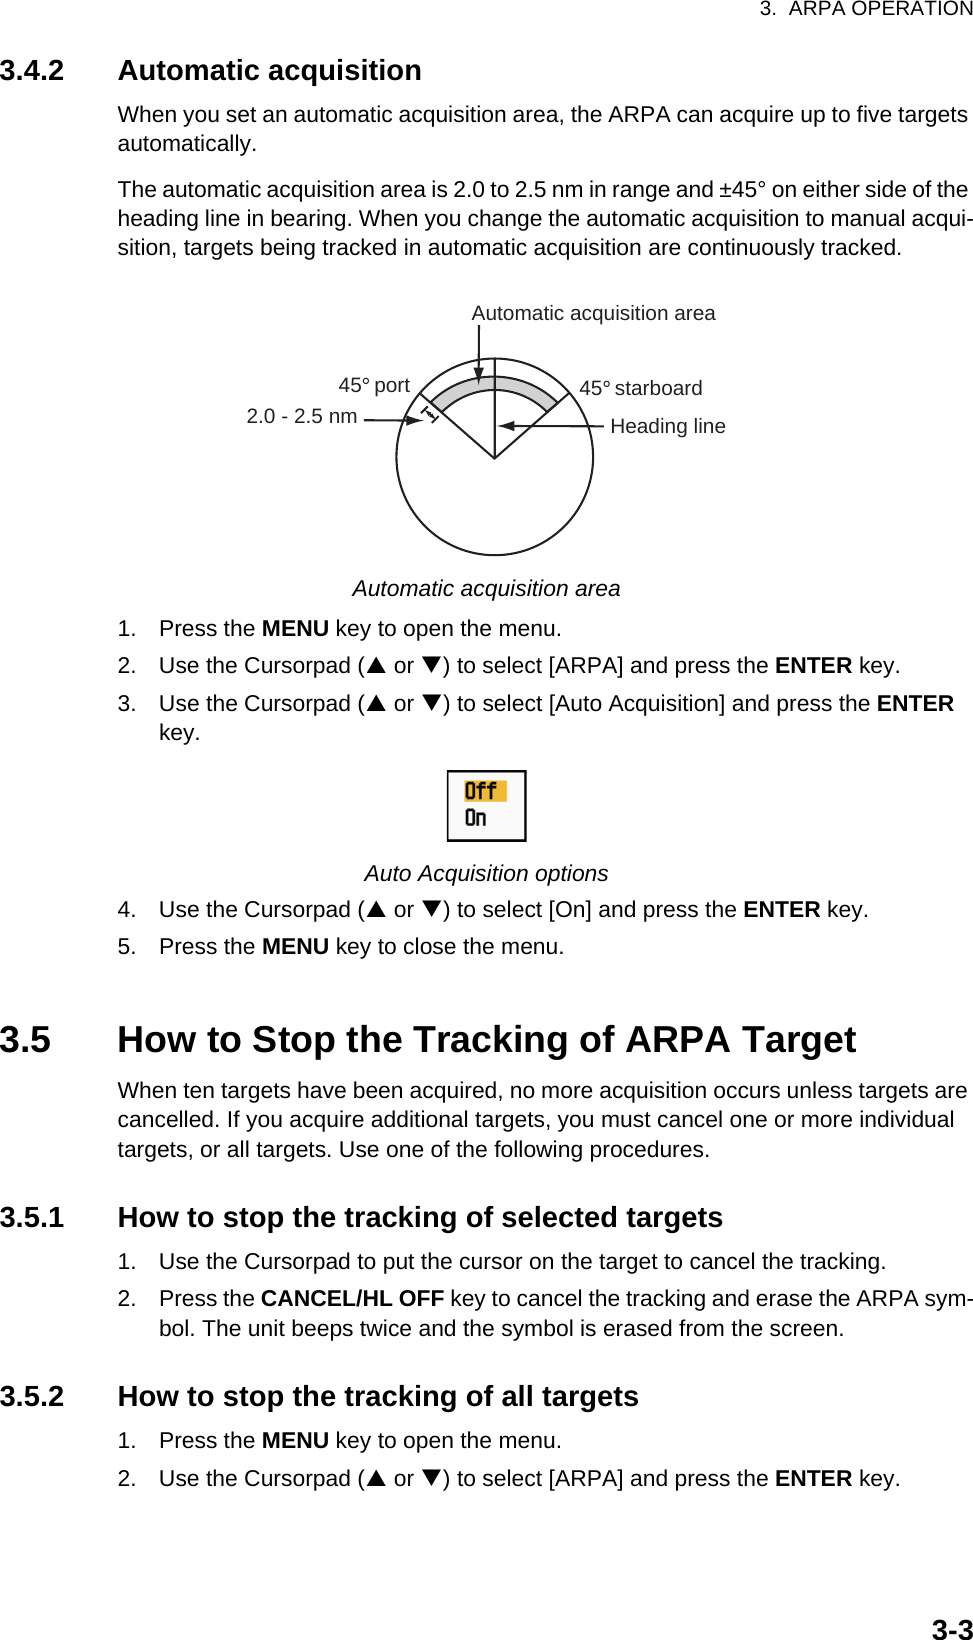 3.  ARPA OPERATION3-33.4.2 Automatic acquisitionWhen you set an automatic acquisition area, the ARPA can acquire up to five targets automatically.The automatic acquisition area is 2.0 to 2.5 nm in range and ±45° on either side of the heading line in bearing. When you change the automatic acquisition to manual acqui-sition, targets being tracked in automatic acquisition are continuously tracked.Automatic acquisition area1. Press the MENU key to open the menu.2. Use the Cursorpad (S or T) to select [ARPA] and press the ENTER key.3. Use the Cursorpad (S or T) to select [Auto Acquisition] and press the ENTER key.Auto Acquisition options4. Use the Cursorpad (S or T) to select [On] and press the ENTER key.5. Press the MENU key to close the menu.3.5 How to Stop the Tracking of ARPA TargetWhen ten targets have been acquired, no more acquisition occurs unless targets are cancelled. If you acquire additional targets, you must cancel one or more individual targets, or all targets. Use one of the following procedures.3.5.1 How to stop the tracking of selected targets1. Use the Cursorpad to put the cursor on the target to cancel the tracking.2. Press the CANCEL/HL OFF key to cancel the tracking and erase the ARPA sym-bol. The unit beeps twice and the symbol is erased from the screen.3.5.2 How to stop the tracking of all targets1. Press the MENU key to open the menu.2. Use the Cursorpad (S or T) to select [ARPA] and press the ENTER key.Automatic acquisition area45° port 45° starboard2.0 - 2.5 nm Heading line